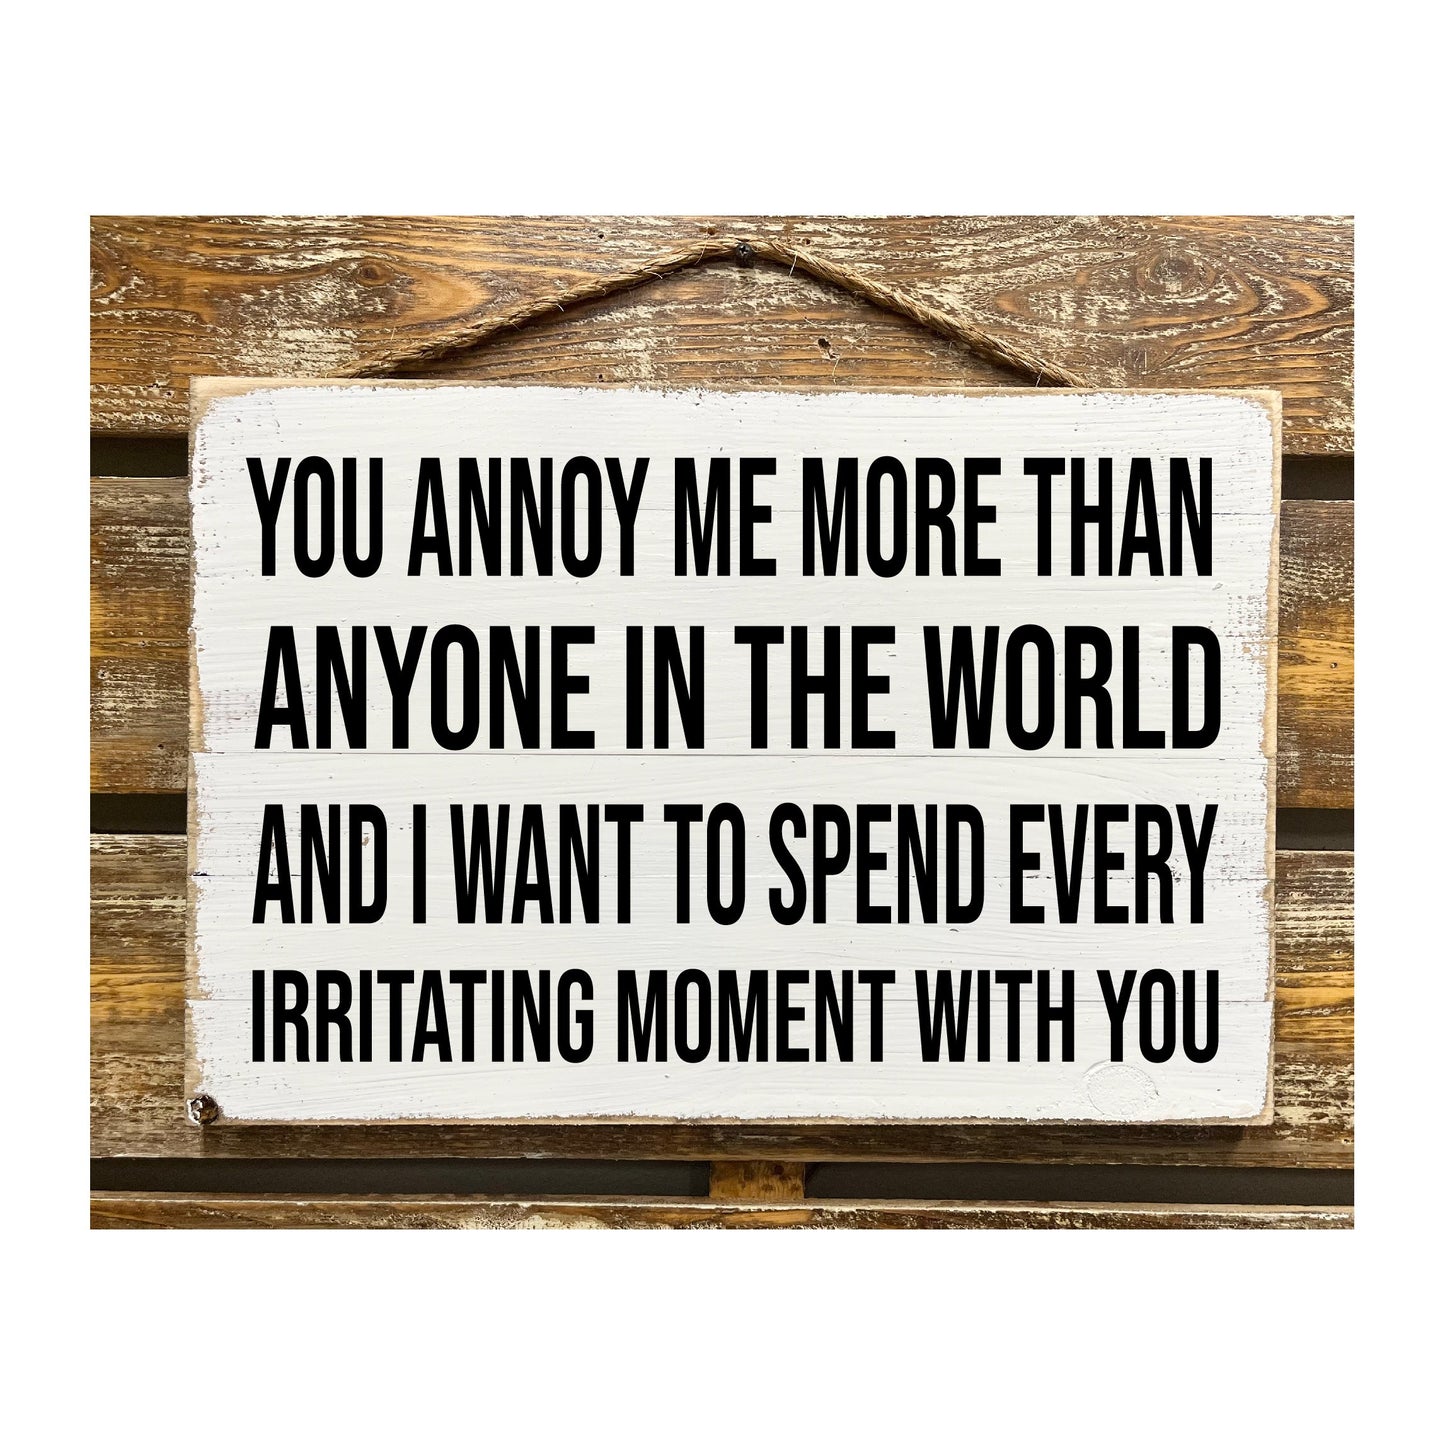 You Annoy Me More Than Anyone In The World...